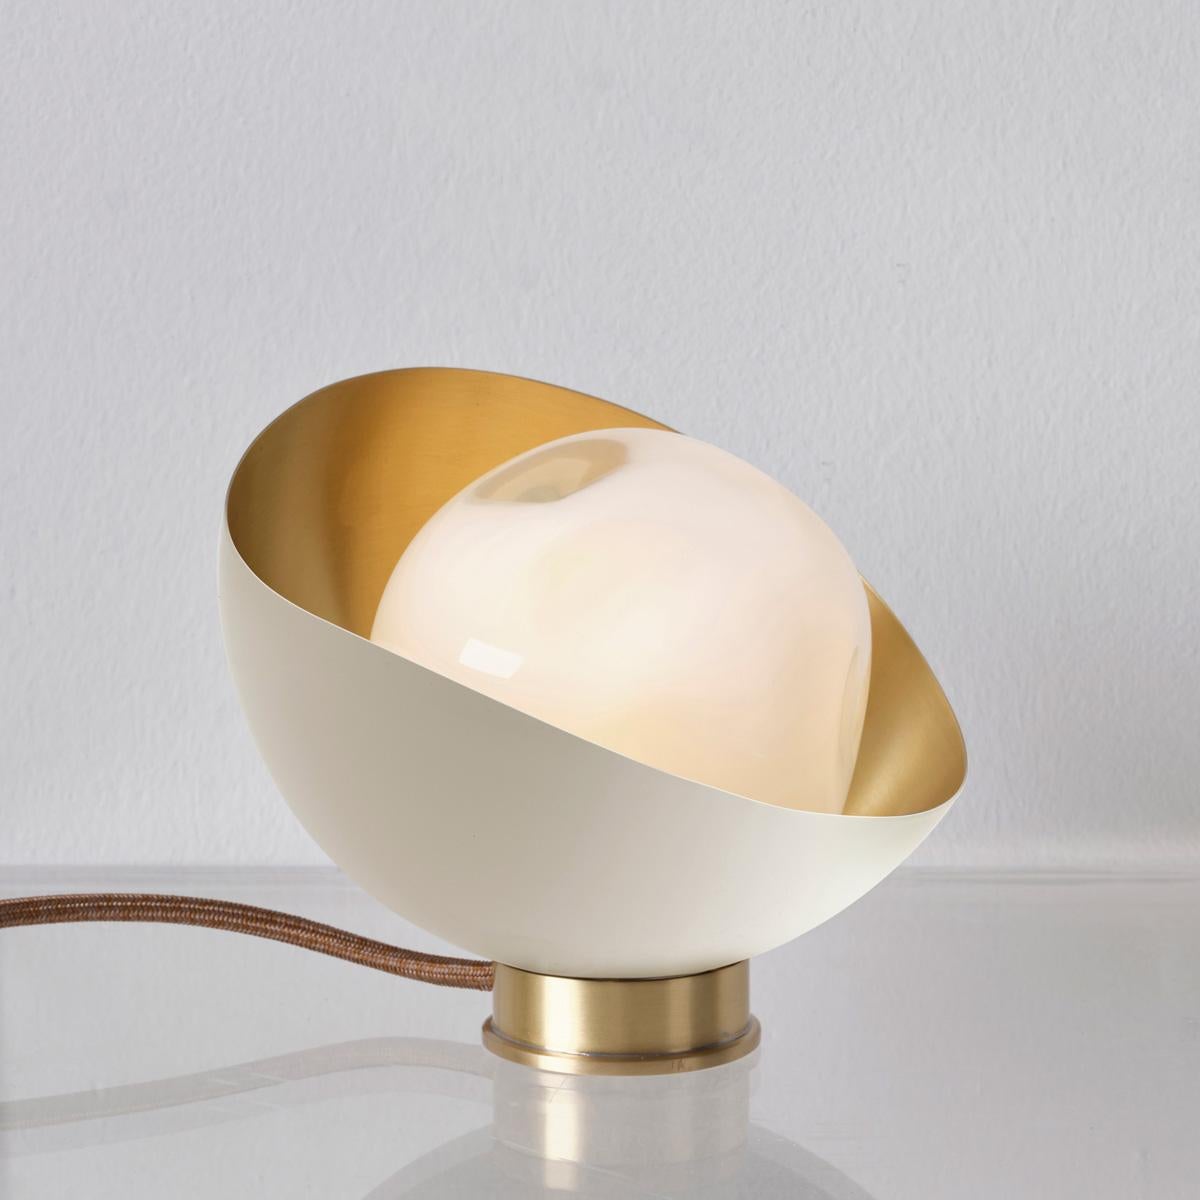 Modern Perla Mini Table Lamp by Gaspare Asaro. Bronze and Satin Brass Finish For Sale